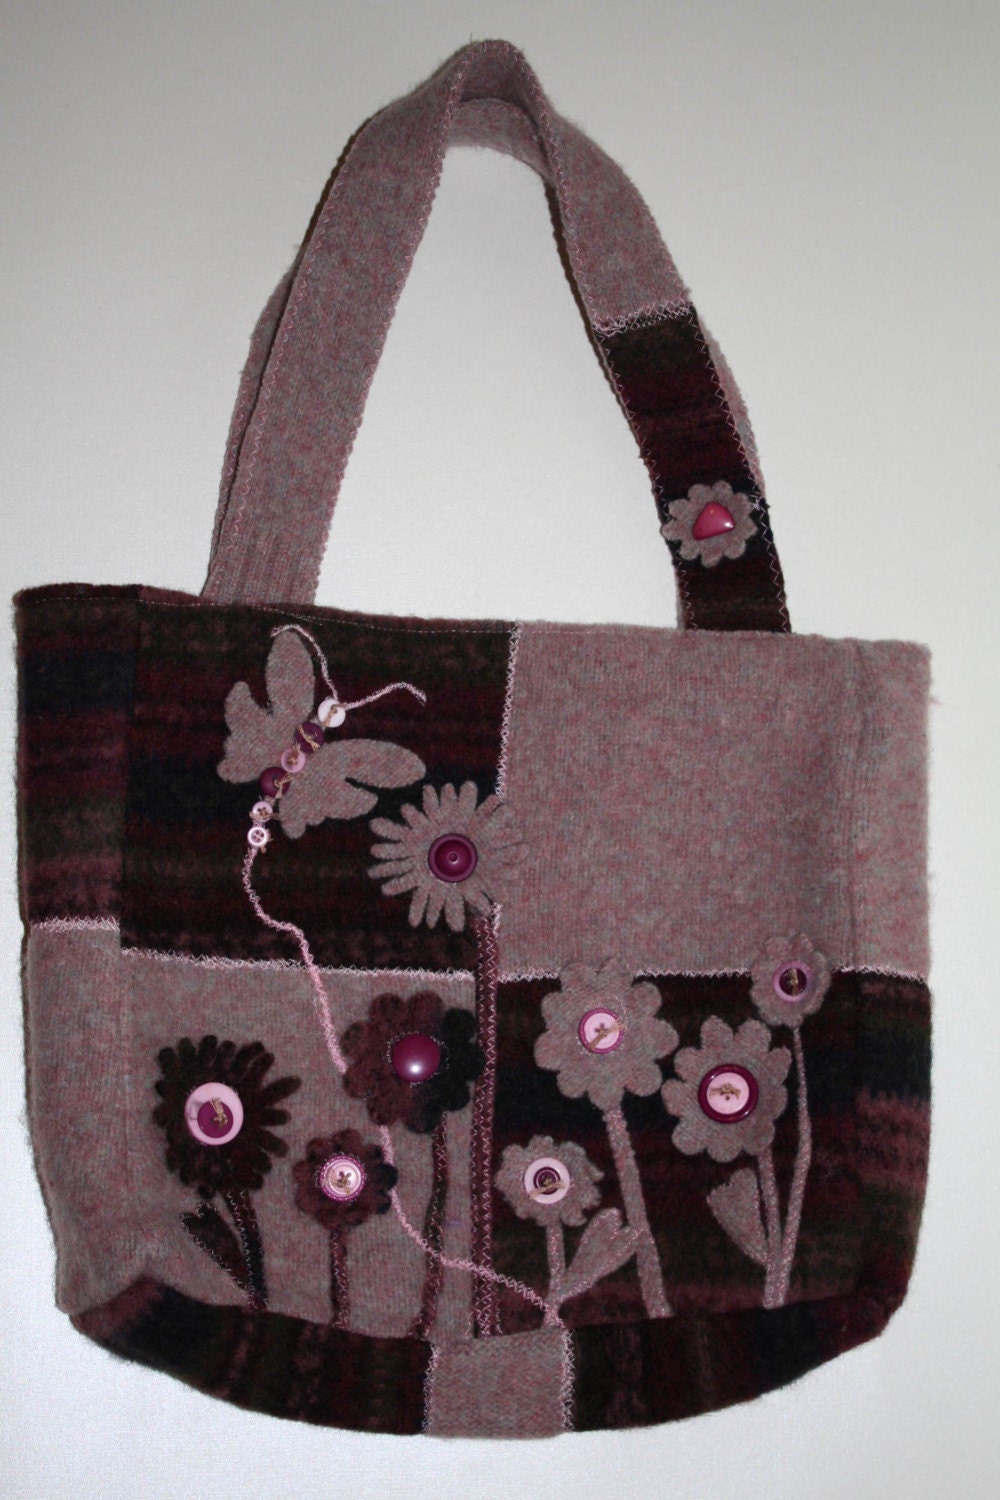 Felted Wool, Upcycle - Burgandy and Rose Felted Wool Tote with Flowers and Butterfly